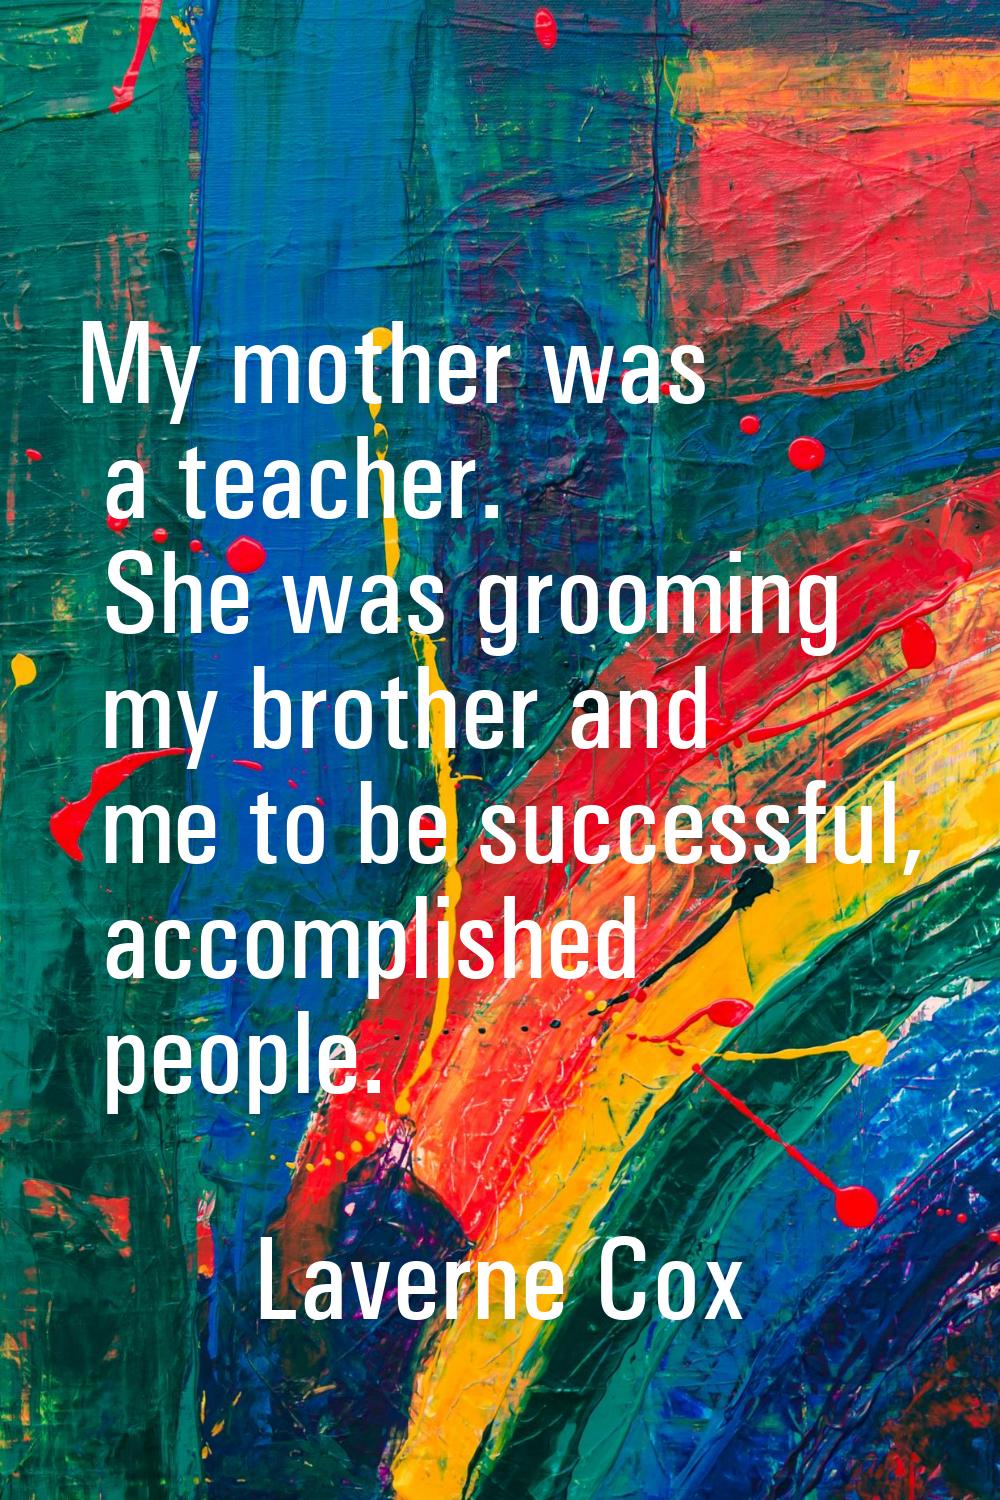 My mother was a teacher. She was grooming my brother and me to be successful, accomplished people.